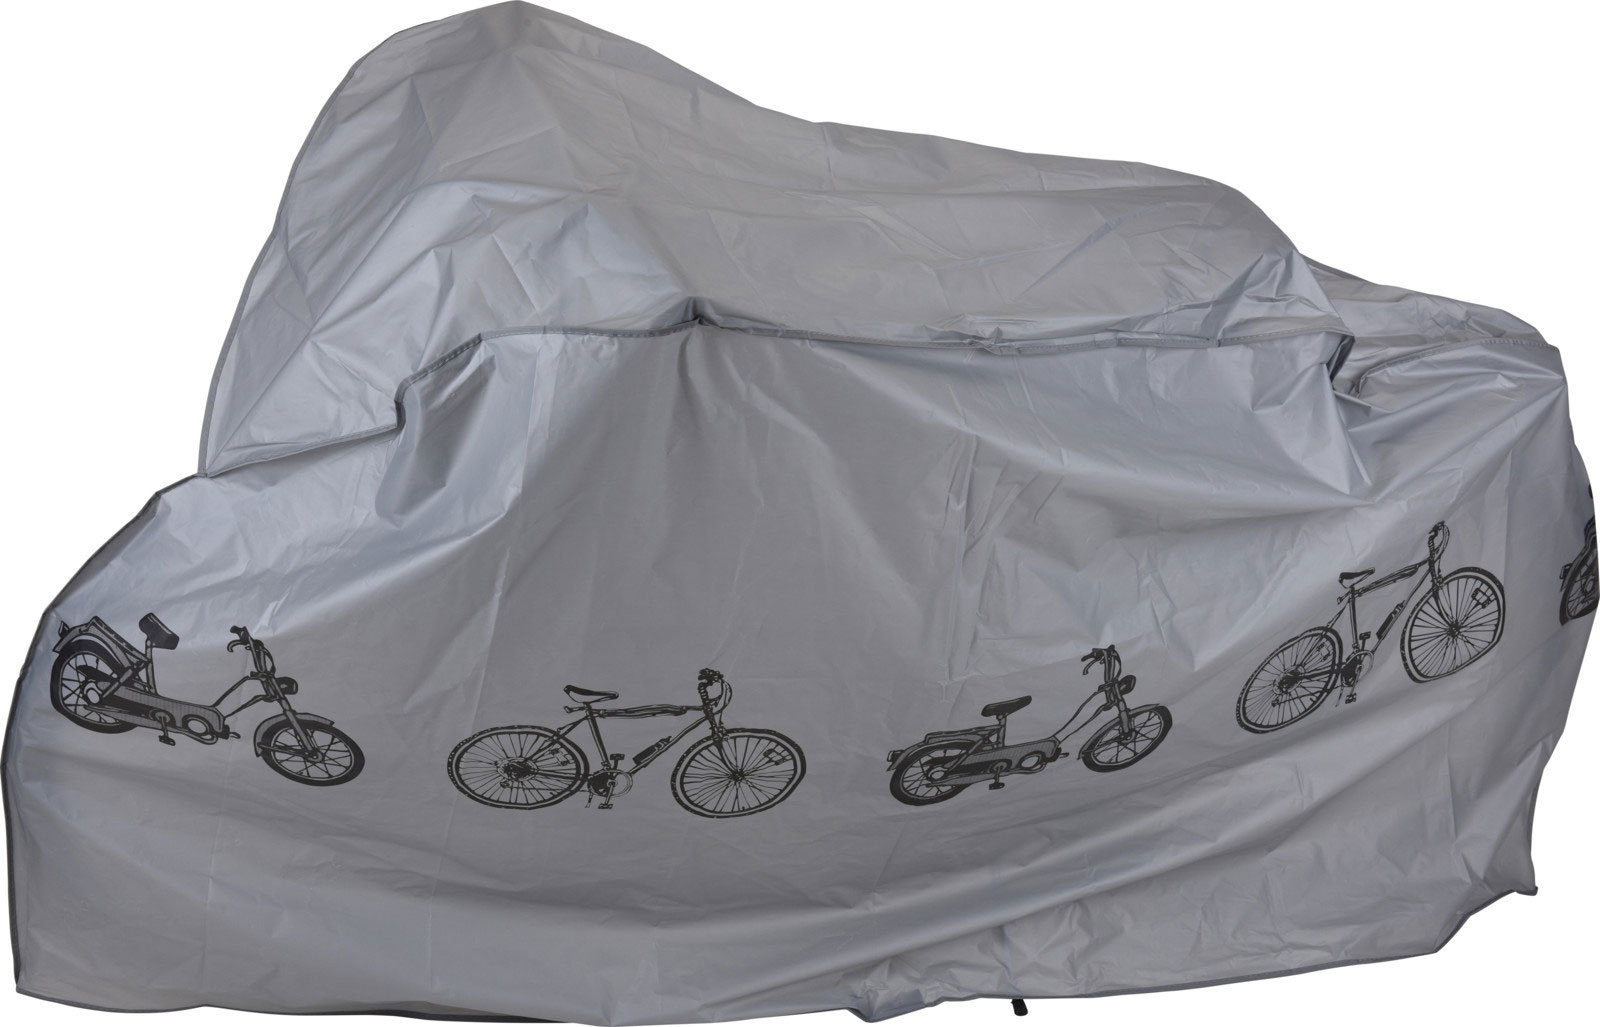 PROTECTIVE COVER FOR BICYCLE